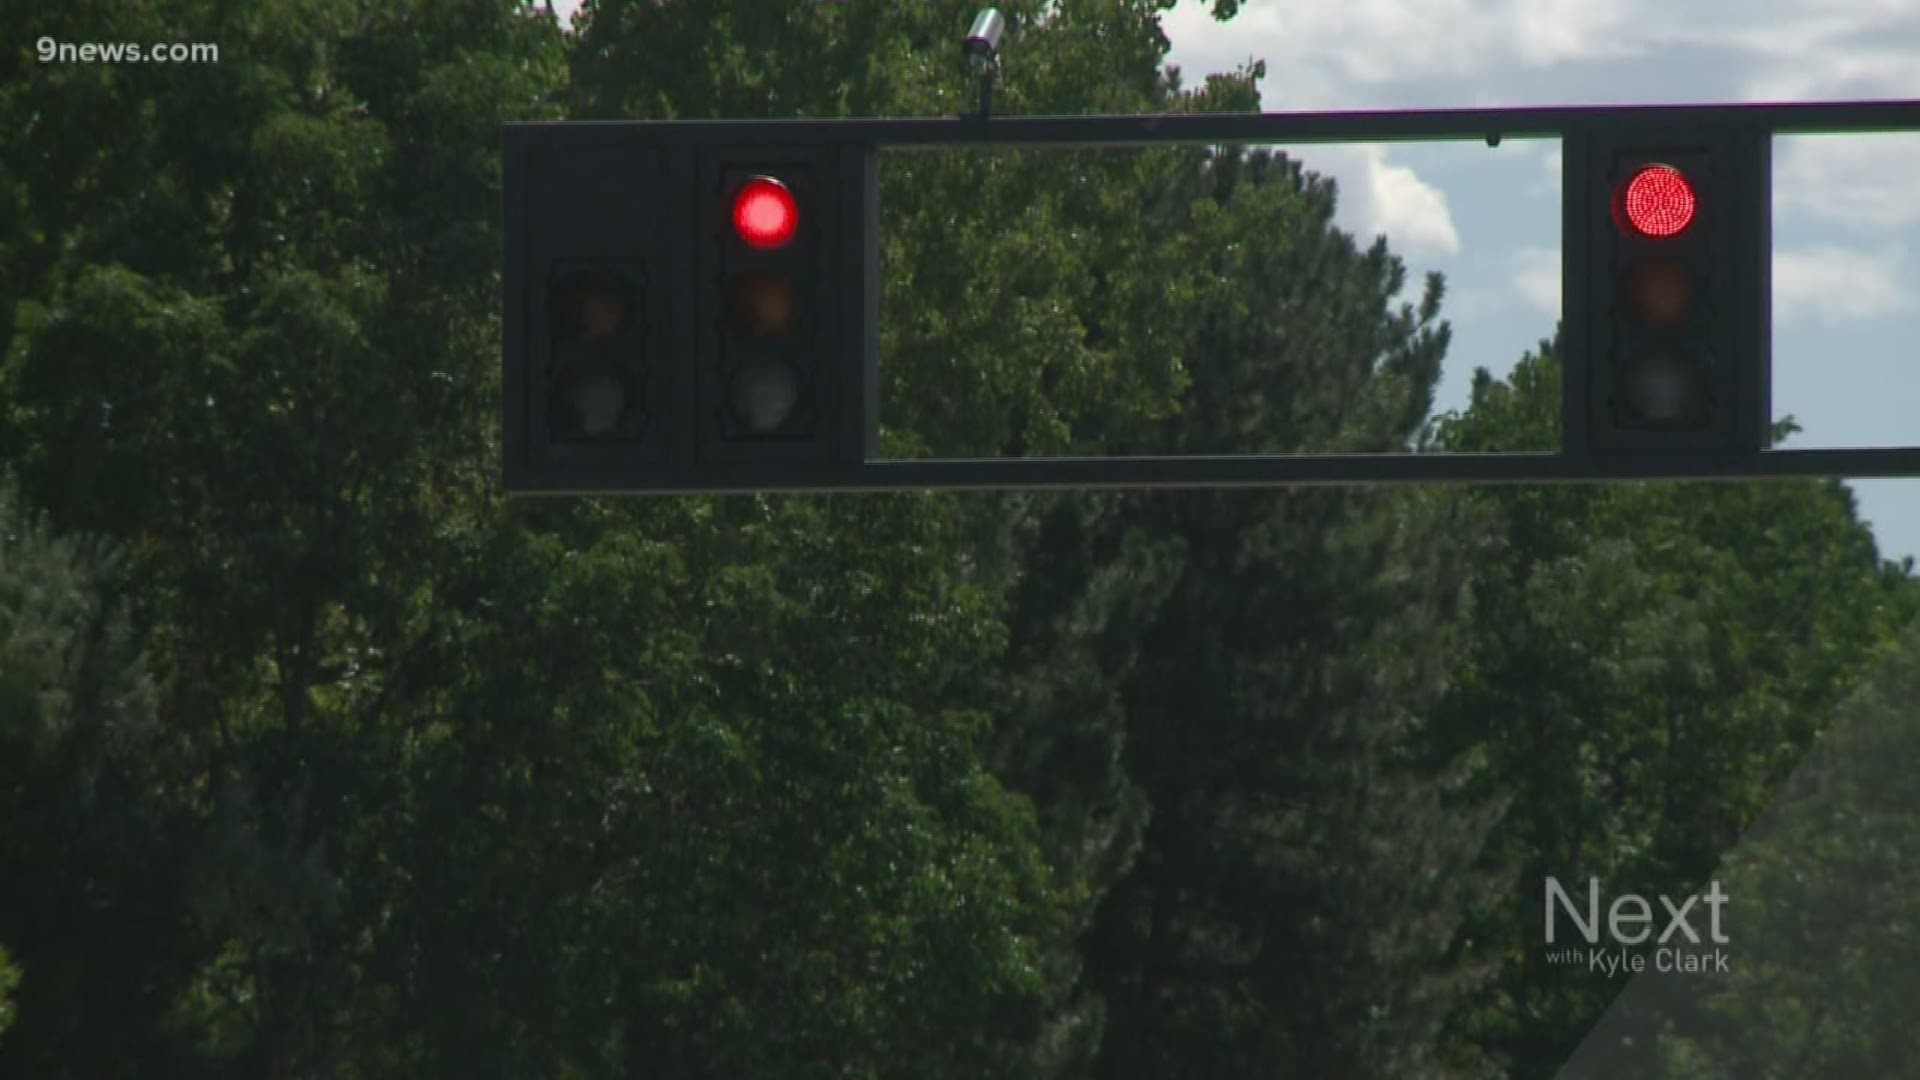 Some cities in the metro area are going to try timing traffic lights by tracking drivers.